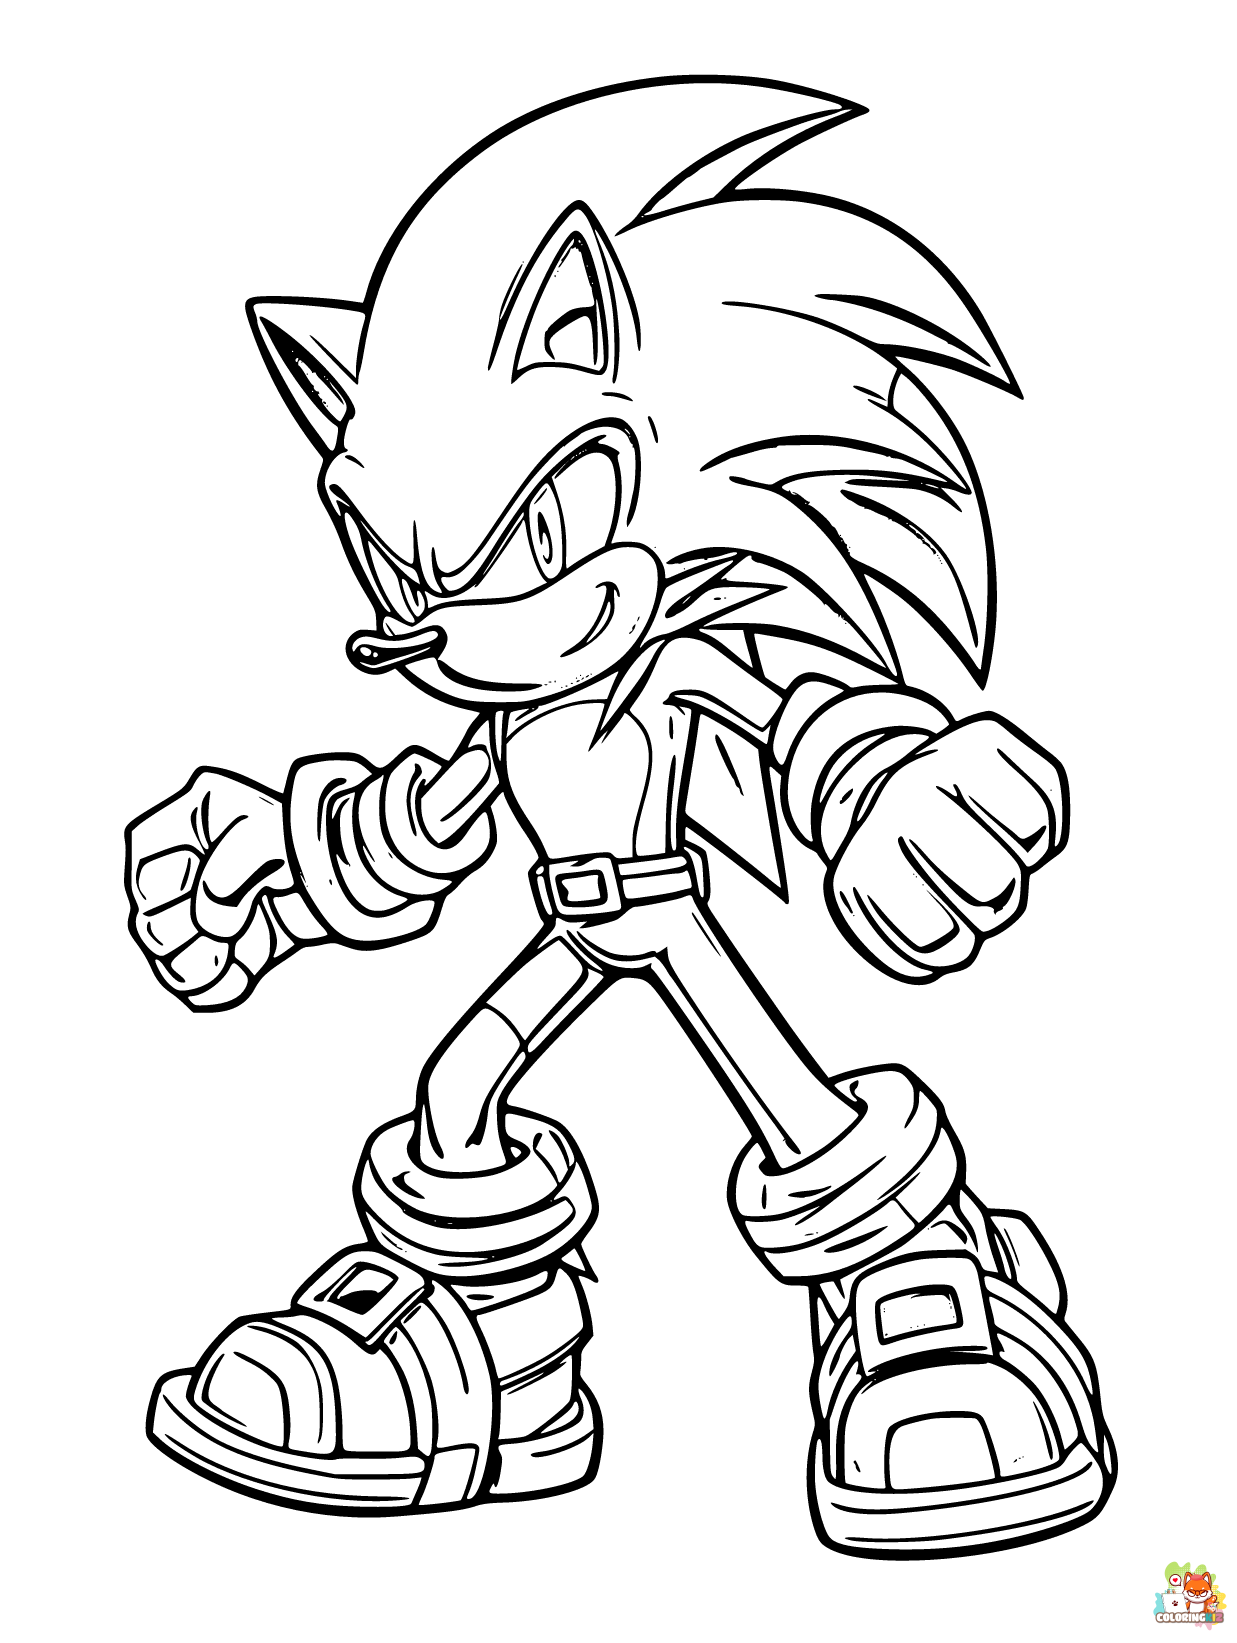 Sonic coloring pages for kids 1